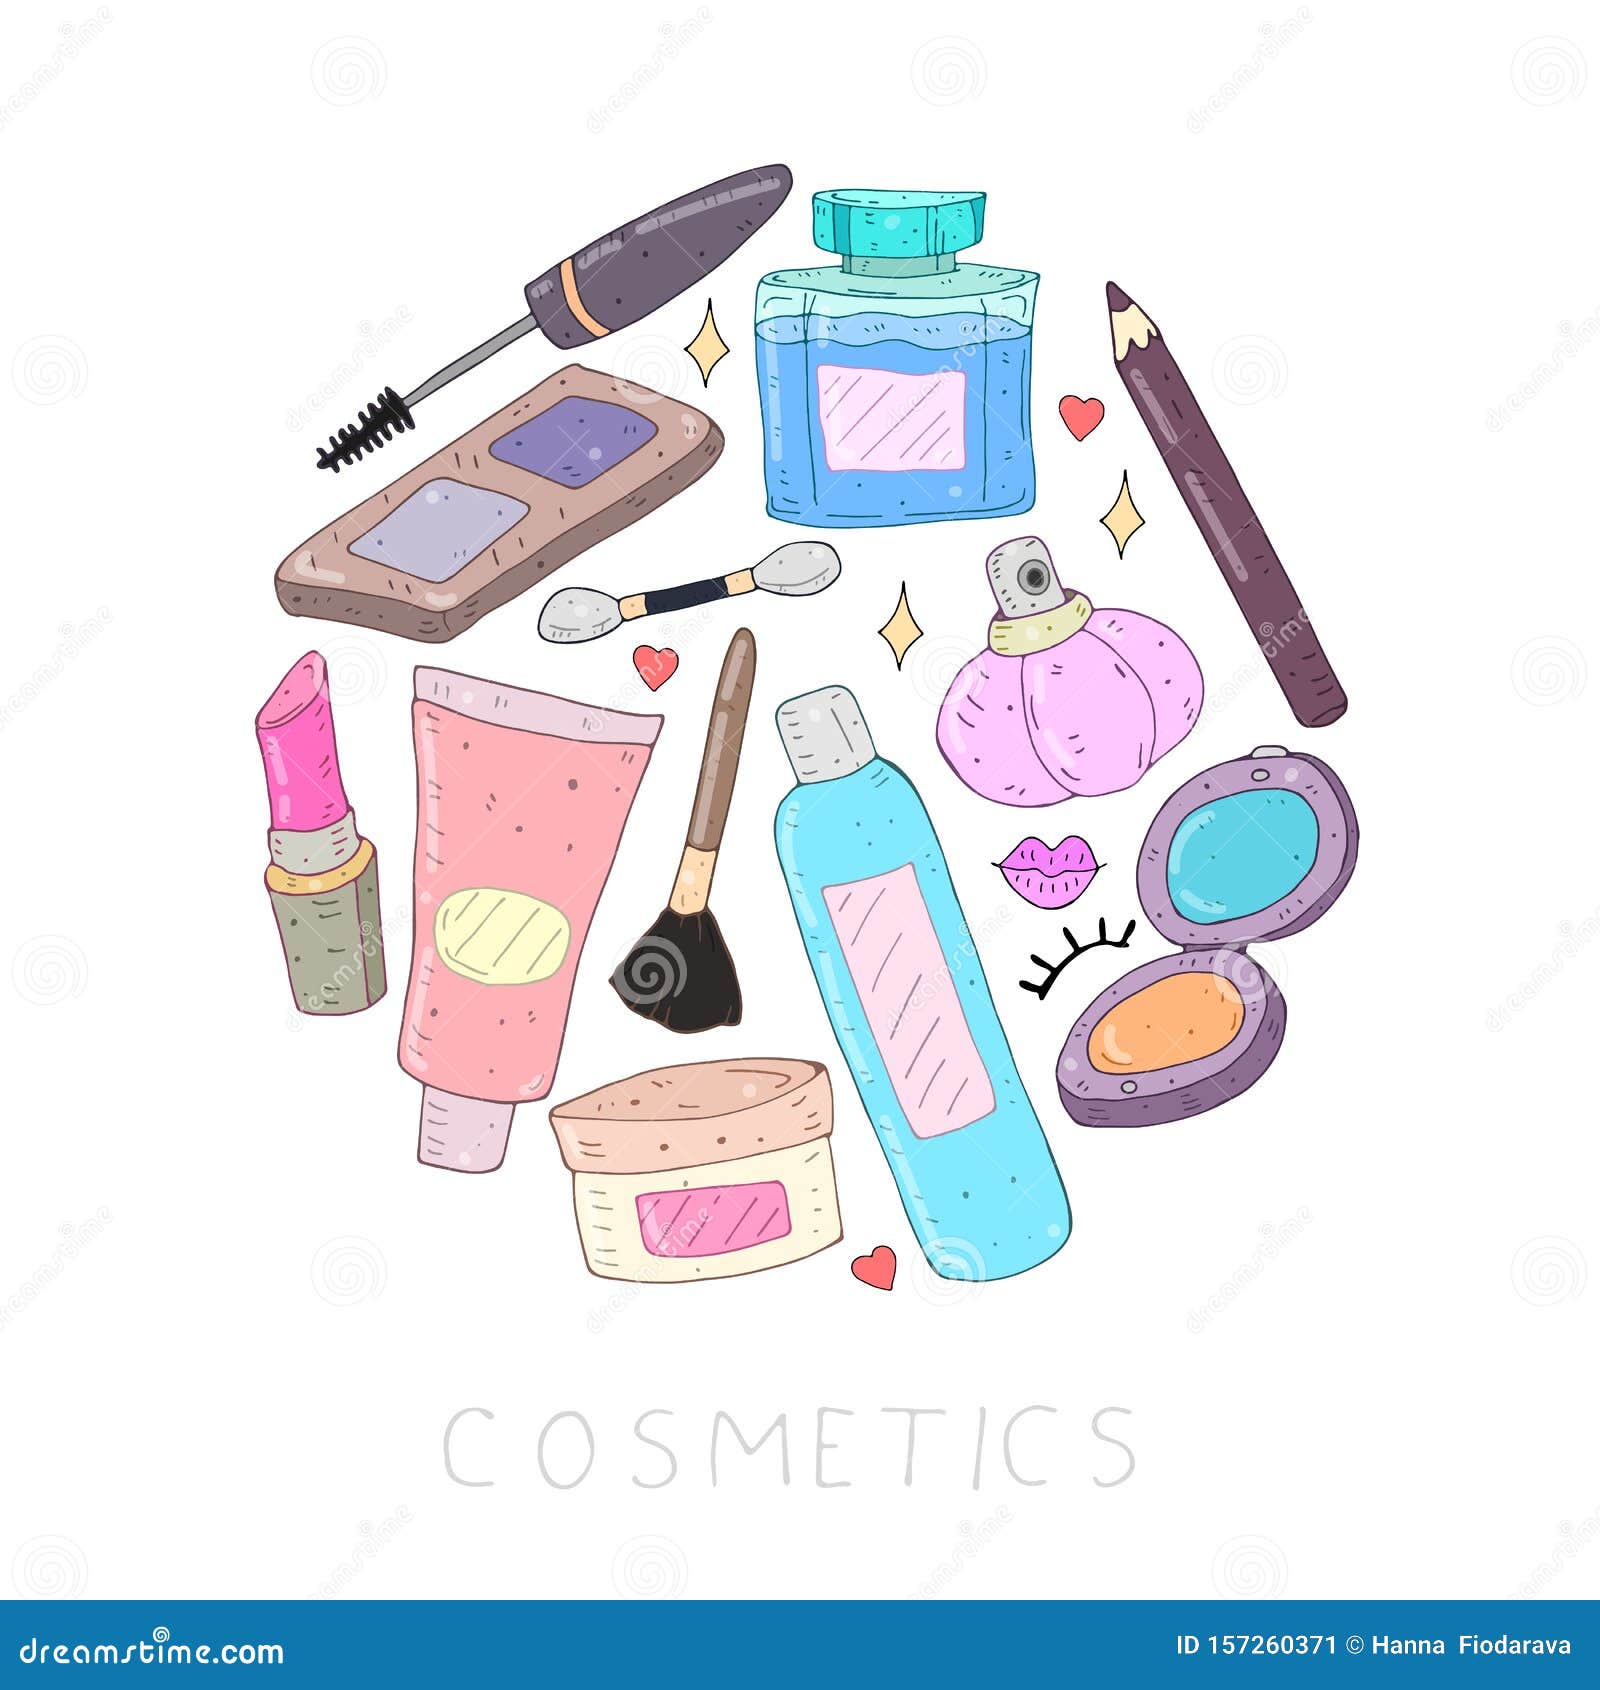 How to Draw a Makeup Set | Coloring Pages Cosmetics, Brushes, Lipstick |...